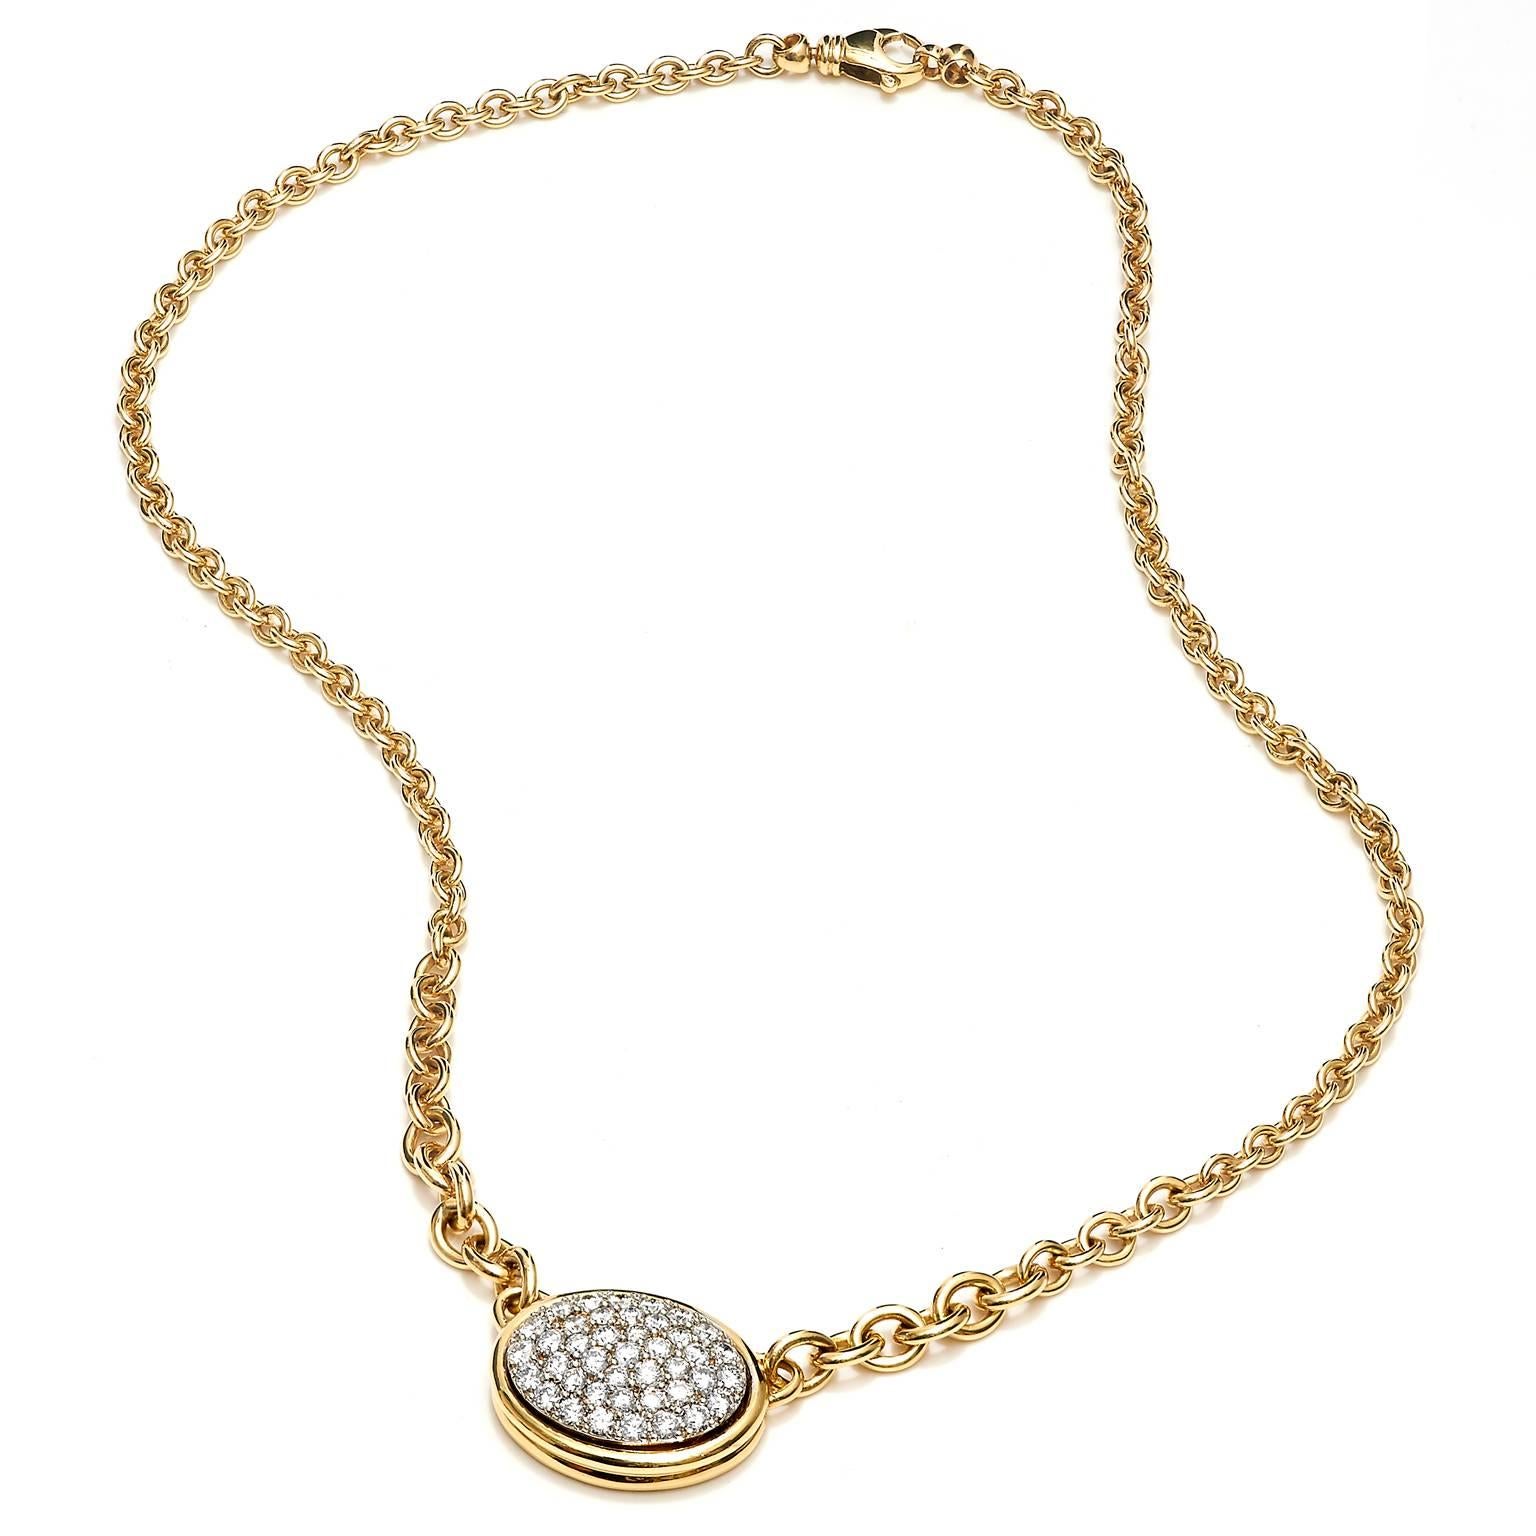 Round Cut 1.99 Carat of Diamonds Set in 14 Karat Gold Oval Shaped Pave Necklace For Sale